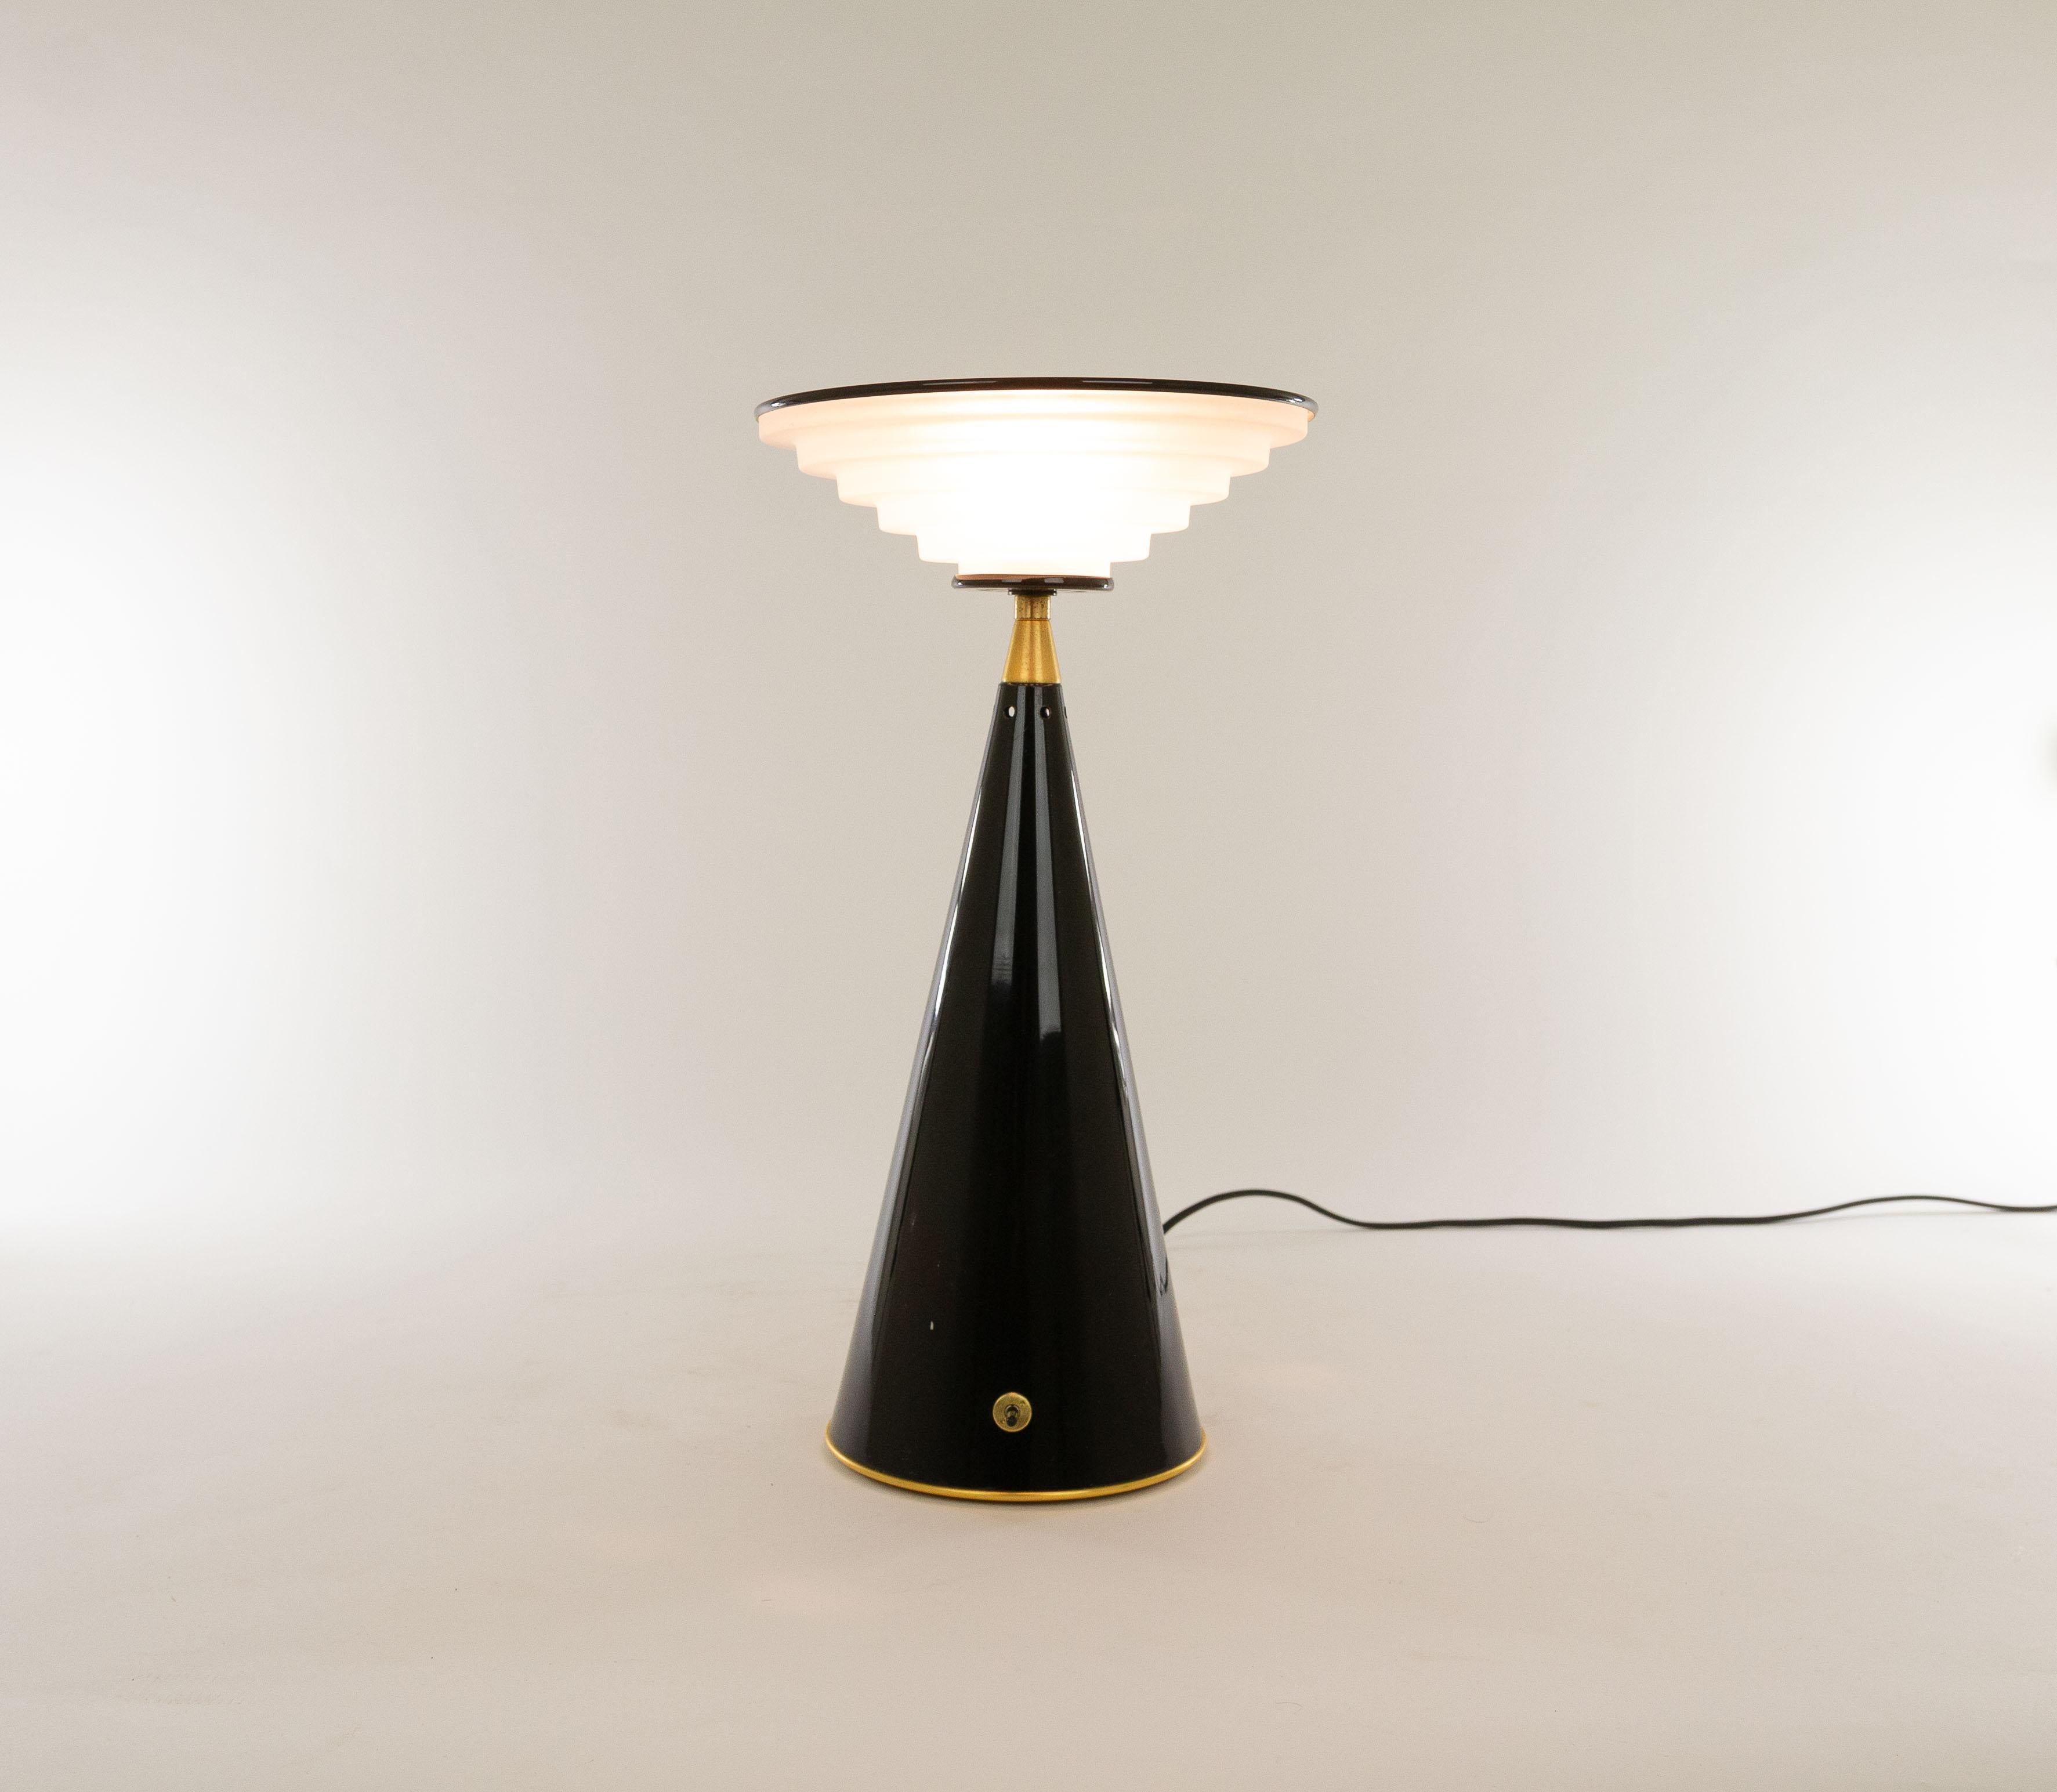 'Ziggurat' is a halogen table lamp designed by Shigeaki Asahara in 1981, and manufactured by Italian lighting manufacturer Stilnovo.

The lamp consists of a conical metal base and an inverted ziggurat-shaped moulded glass diffuser with a metal